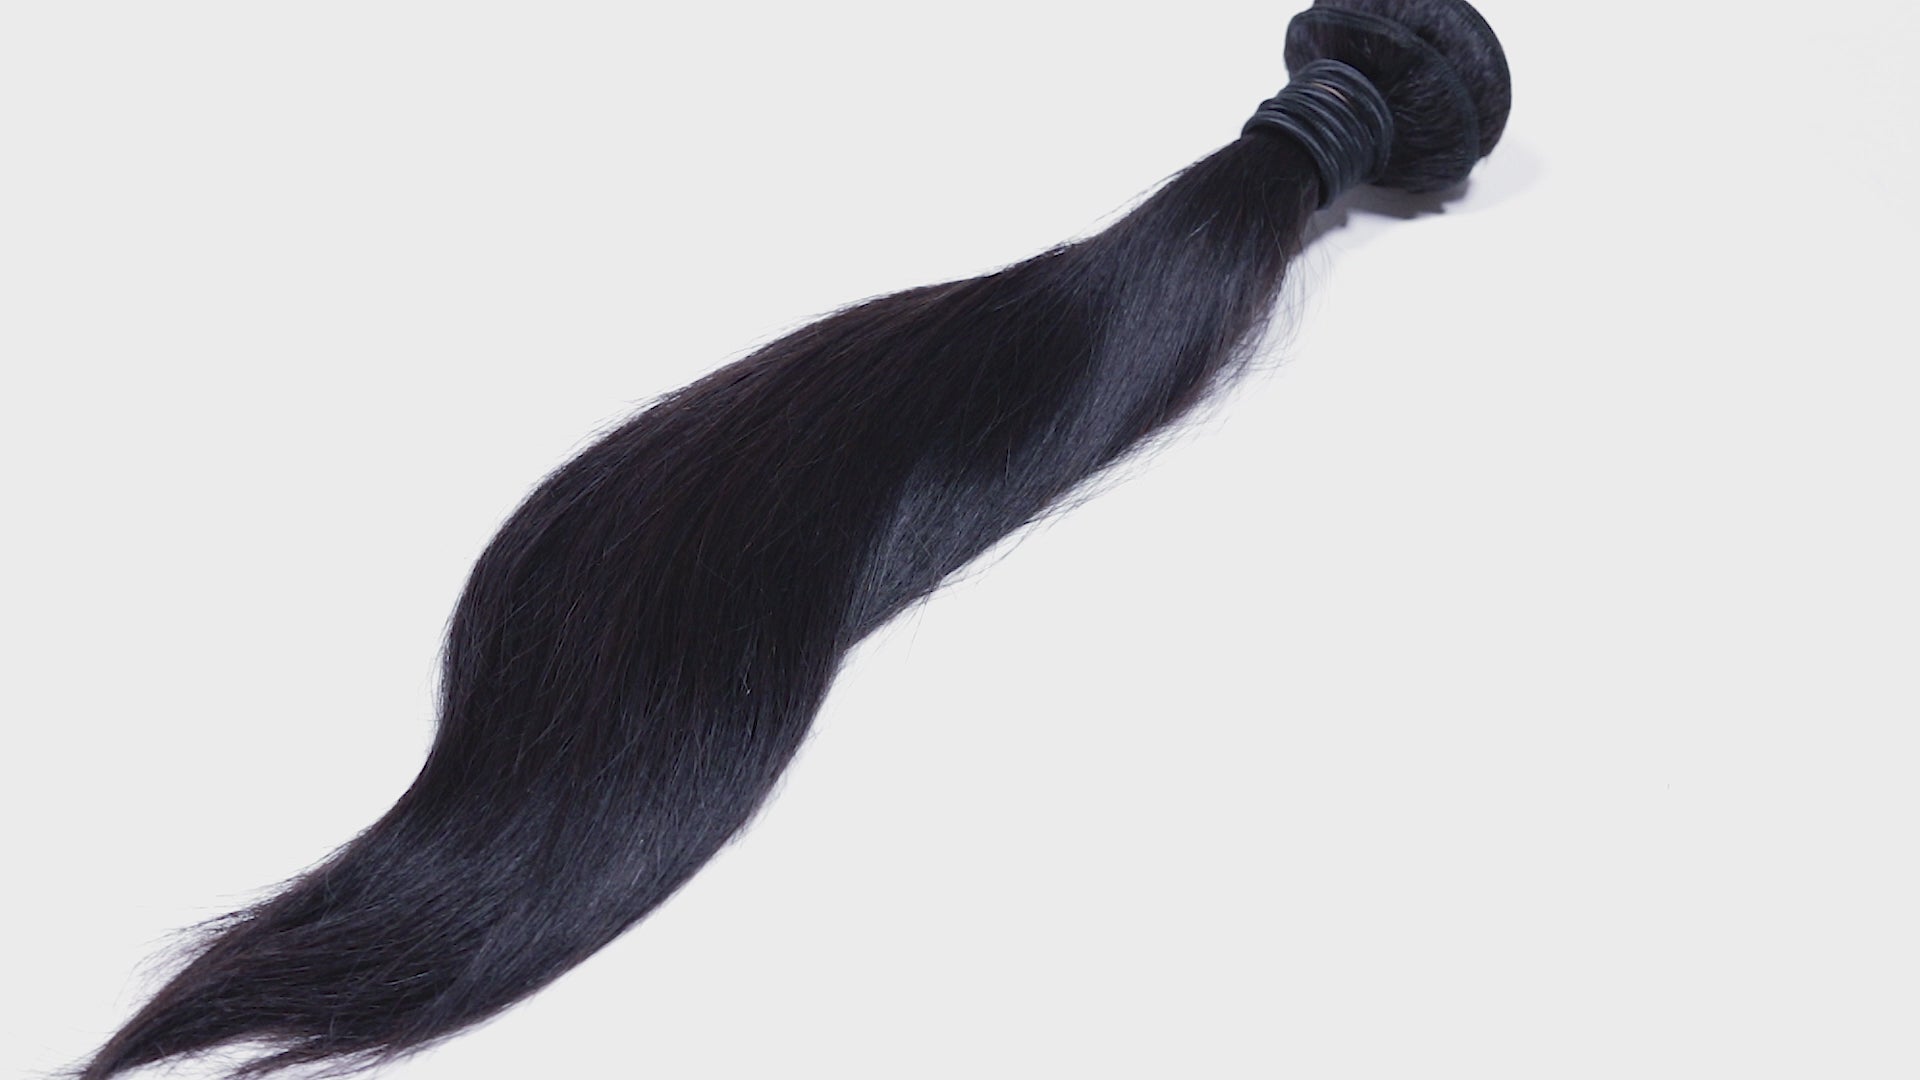 The Malaysian Silky Straight bundle deals are our #1 seller! Get ready for a soft and silky hairstyle that is so easy to style and take care of. This is for you!  Hair: Virgin Natural Human Hair  Style: Silky Straight Hair Extensions  Lengths: Available 10" - 24" / Various Bundle Deals  Weft: Machined Double Stitch  Weight: 3.5 oz  per bundle / 3 Bundles Per Deal  Individual: Malaysian Silky Straight Hair Extensions 